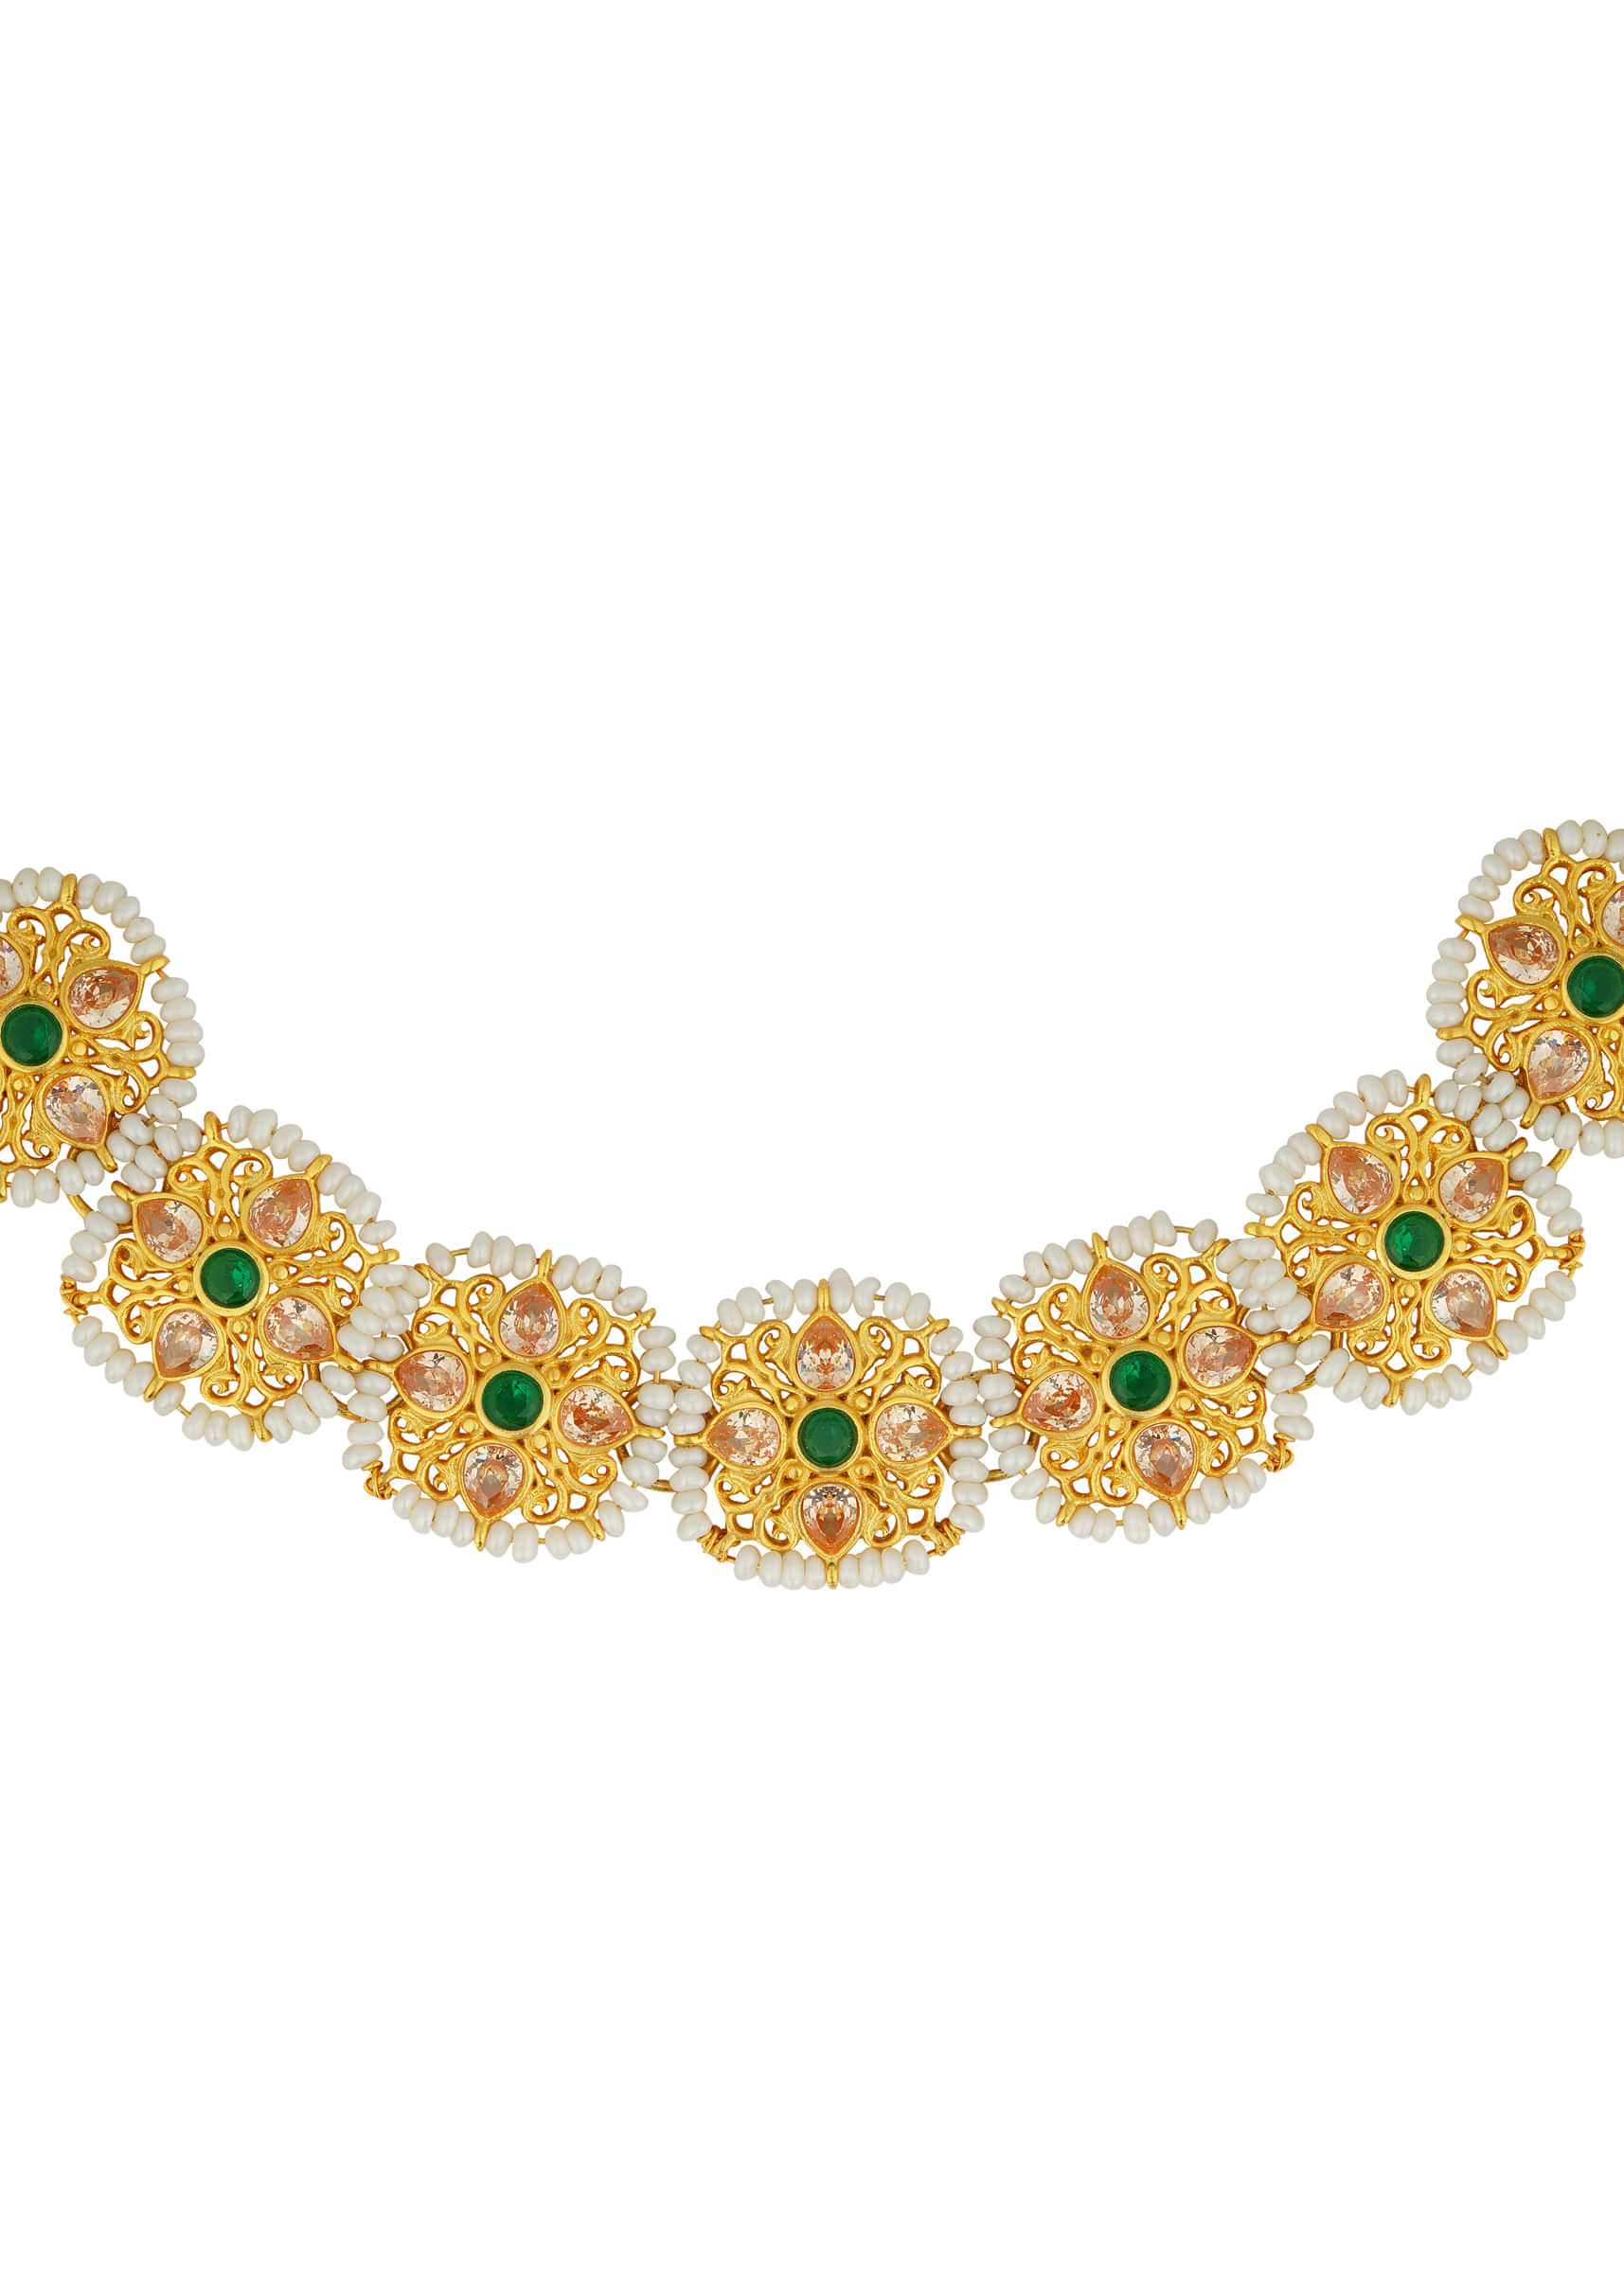 Gold Plated Necklace With Mughal Inspired Motifs Adorned In Pearls And Green Cz By Zariin